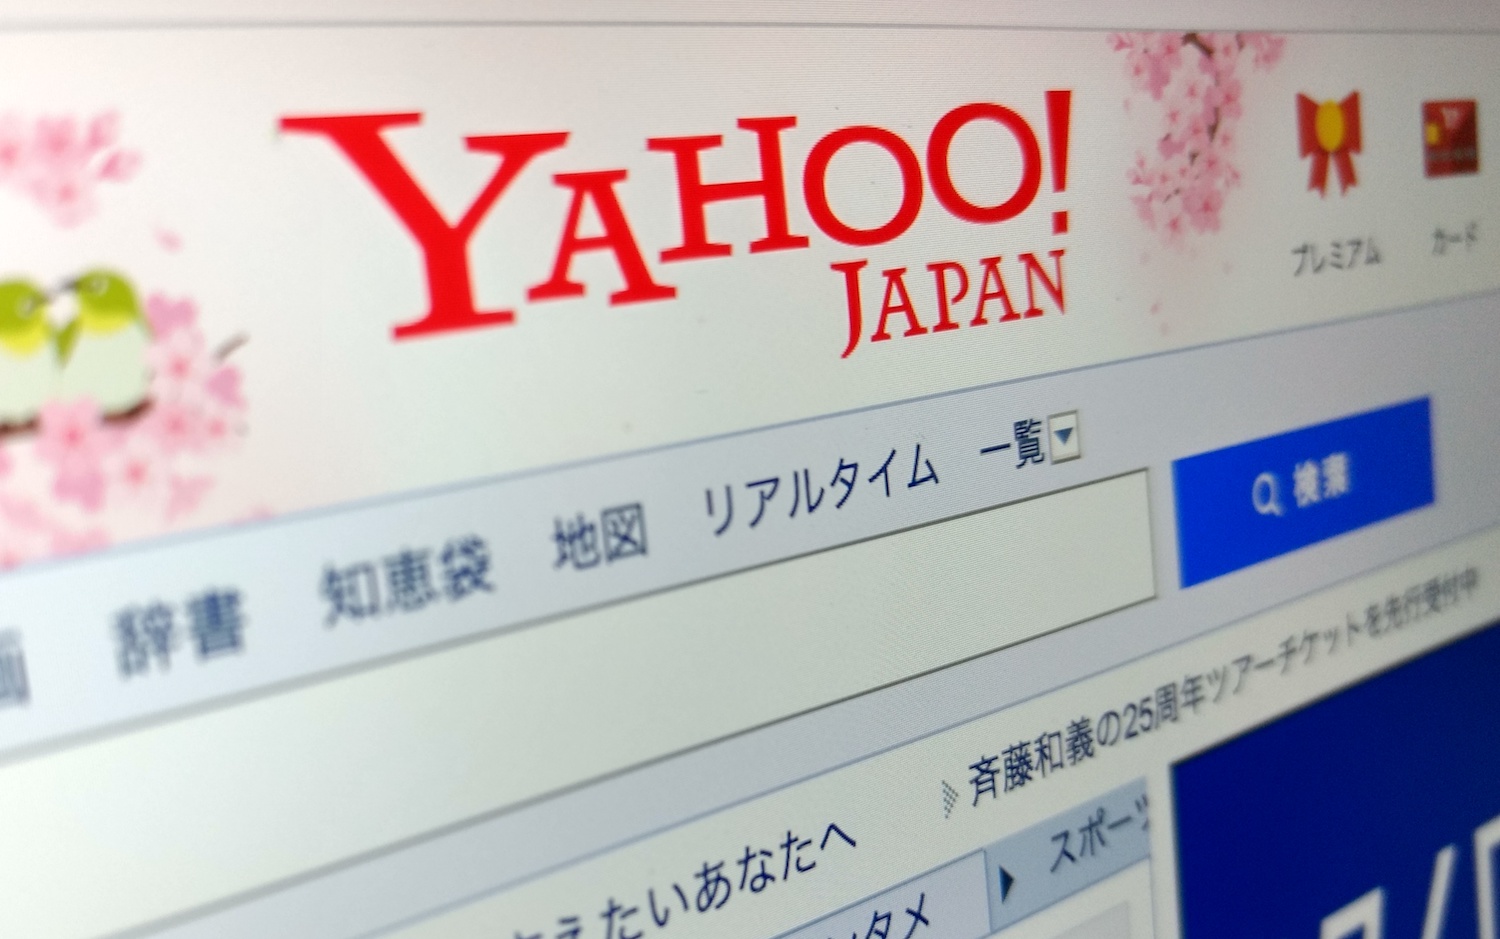 Yahoo Japan-Backed Crypto Exchange Taotao Launches This Week